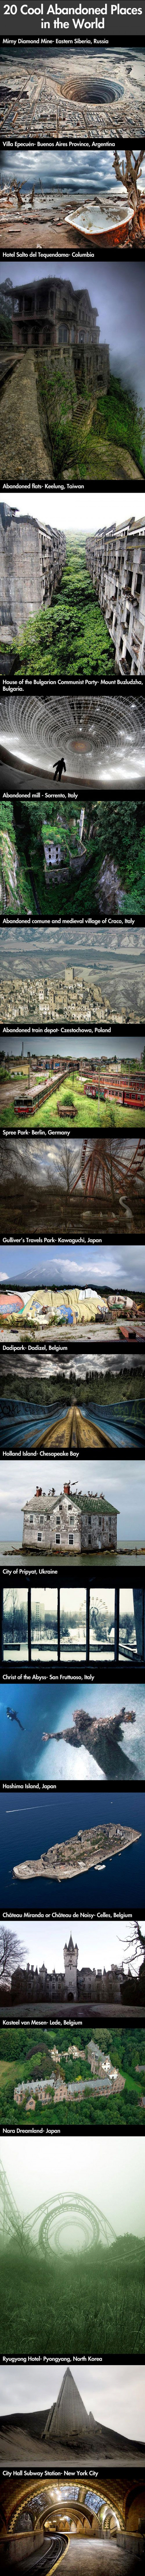 20 Amazing Abandoned Places In The World You Would Love To Visit